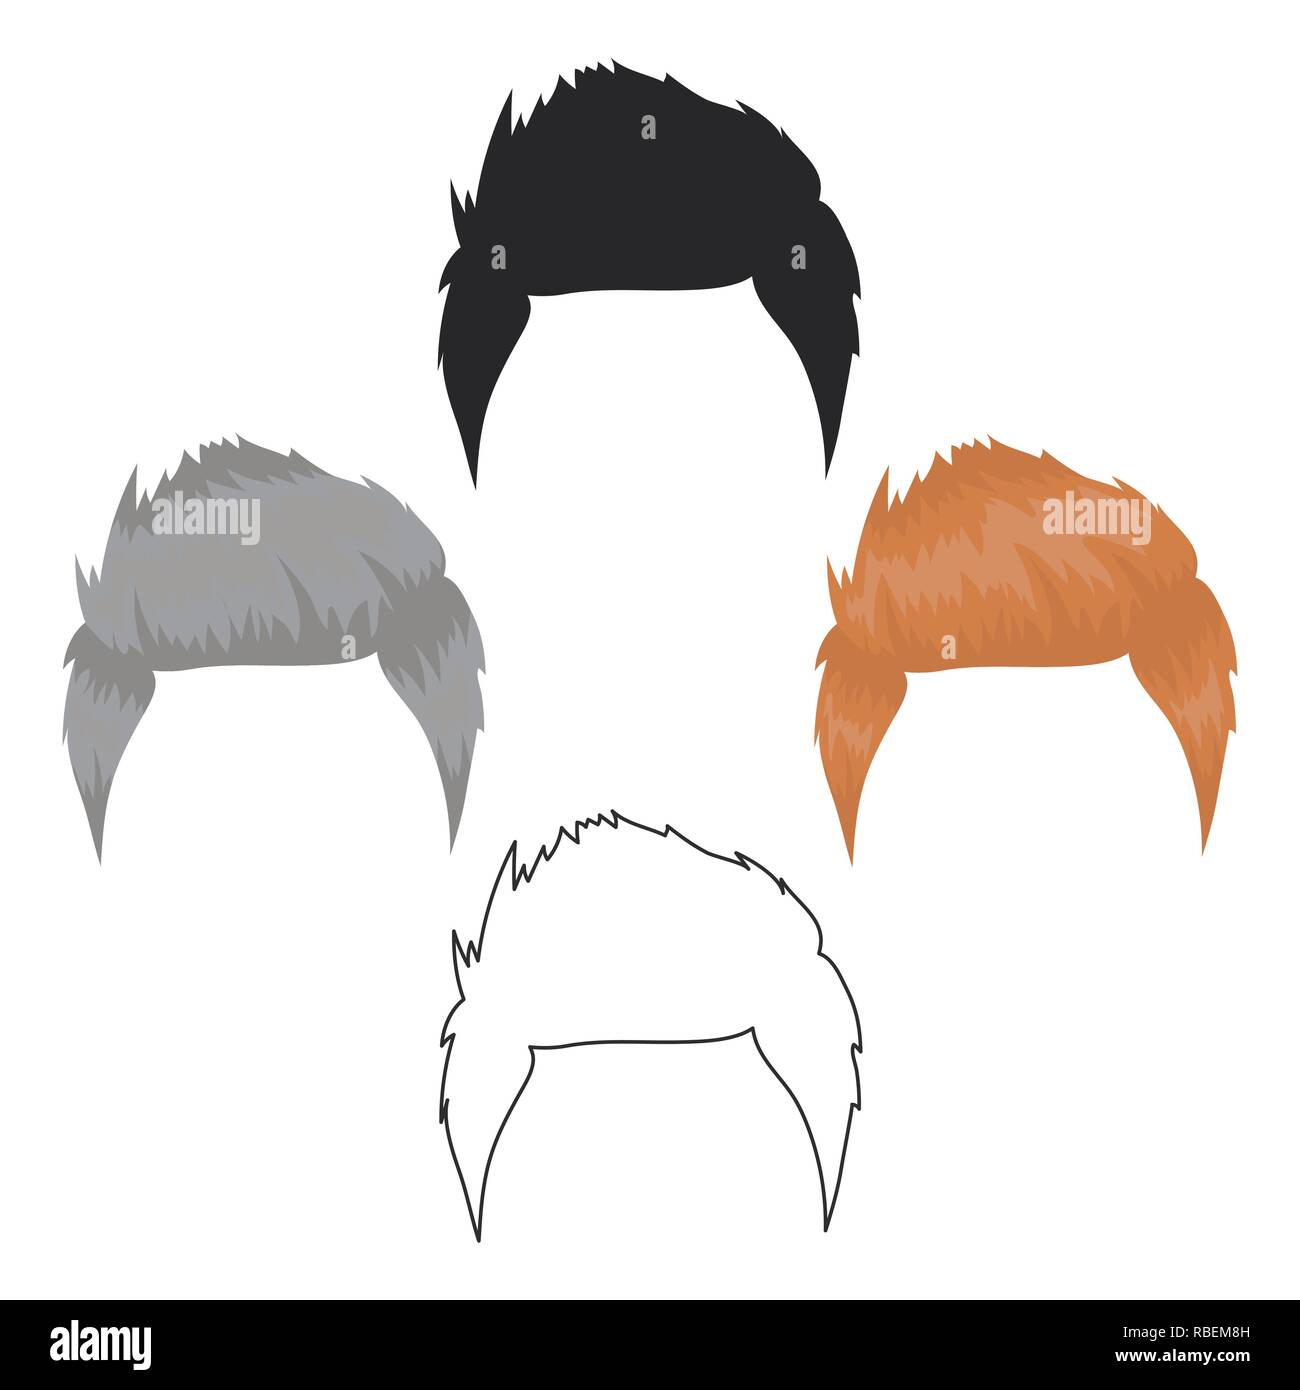 afro,art,barbershop,beauty,brown,cartoon,comb,design,fashion,graphic,gray, hair,haircut,hairdo,hairdresser,hairstyle,head,hipster,icon ,illustration,isolated,logo,male,men ,mohawk,over,pompadour,retro,salon,short,silhouette,style,symbol,vector,web,  Vector ...